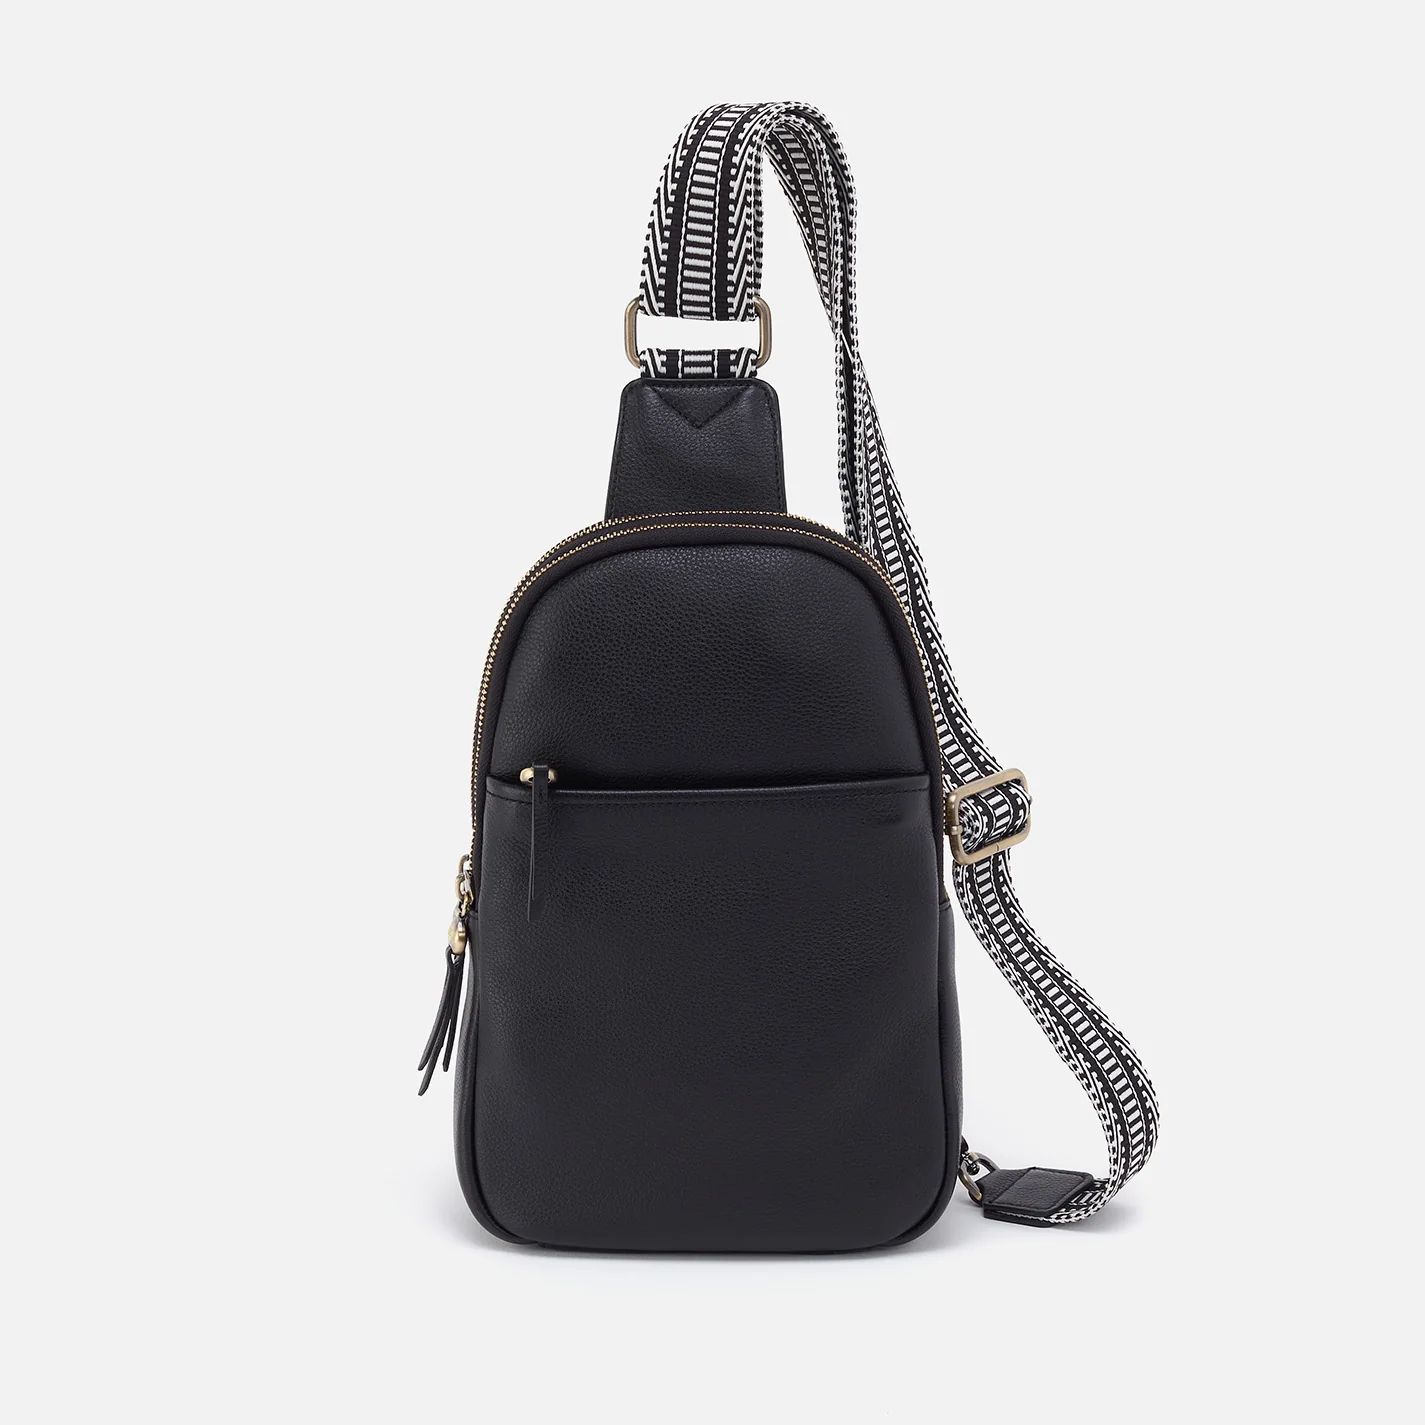 Cass Sling in Pebbled Leather - Black | HOBO Bags